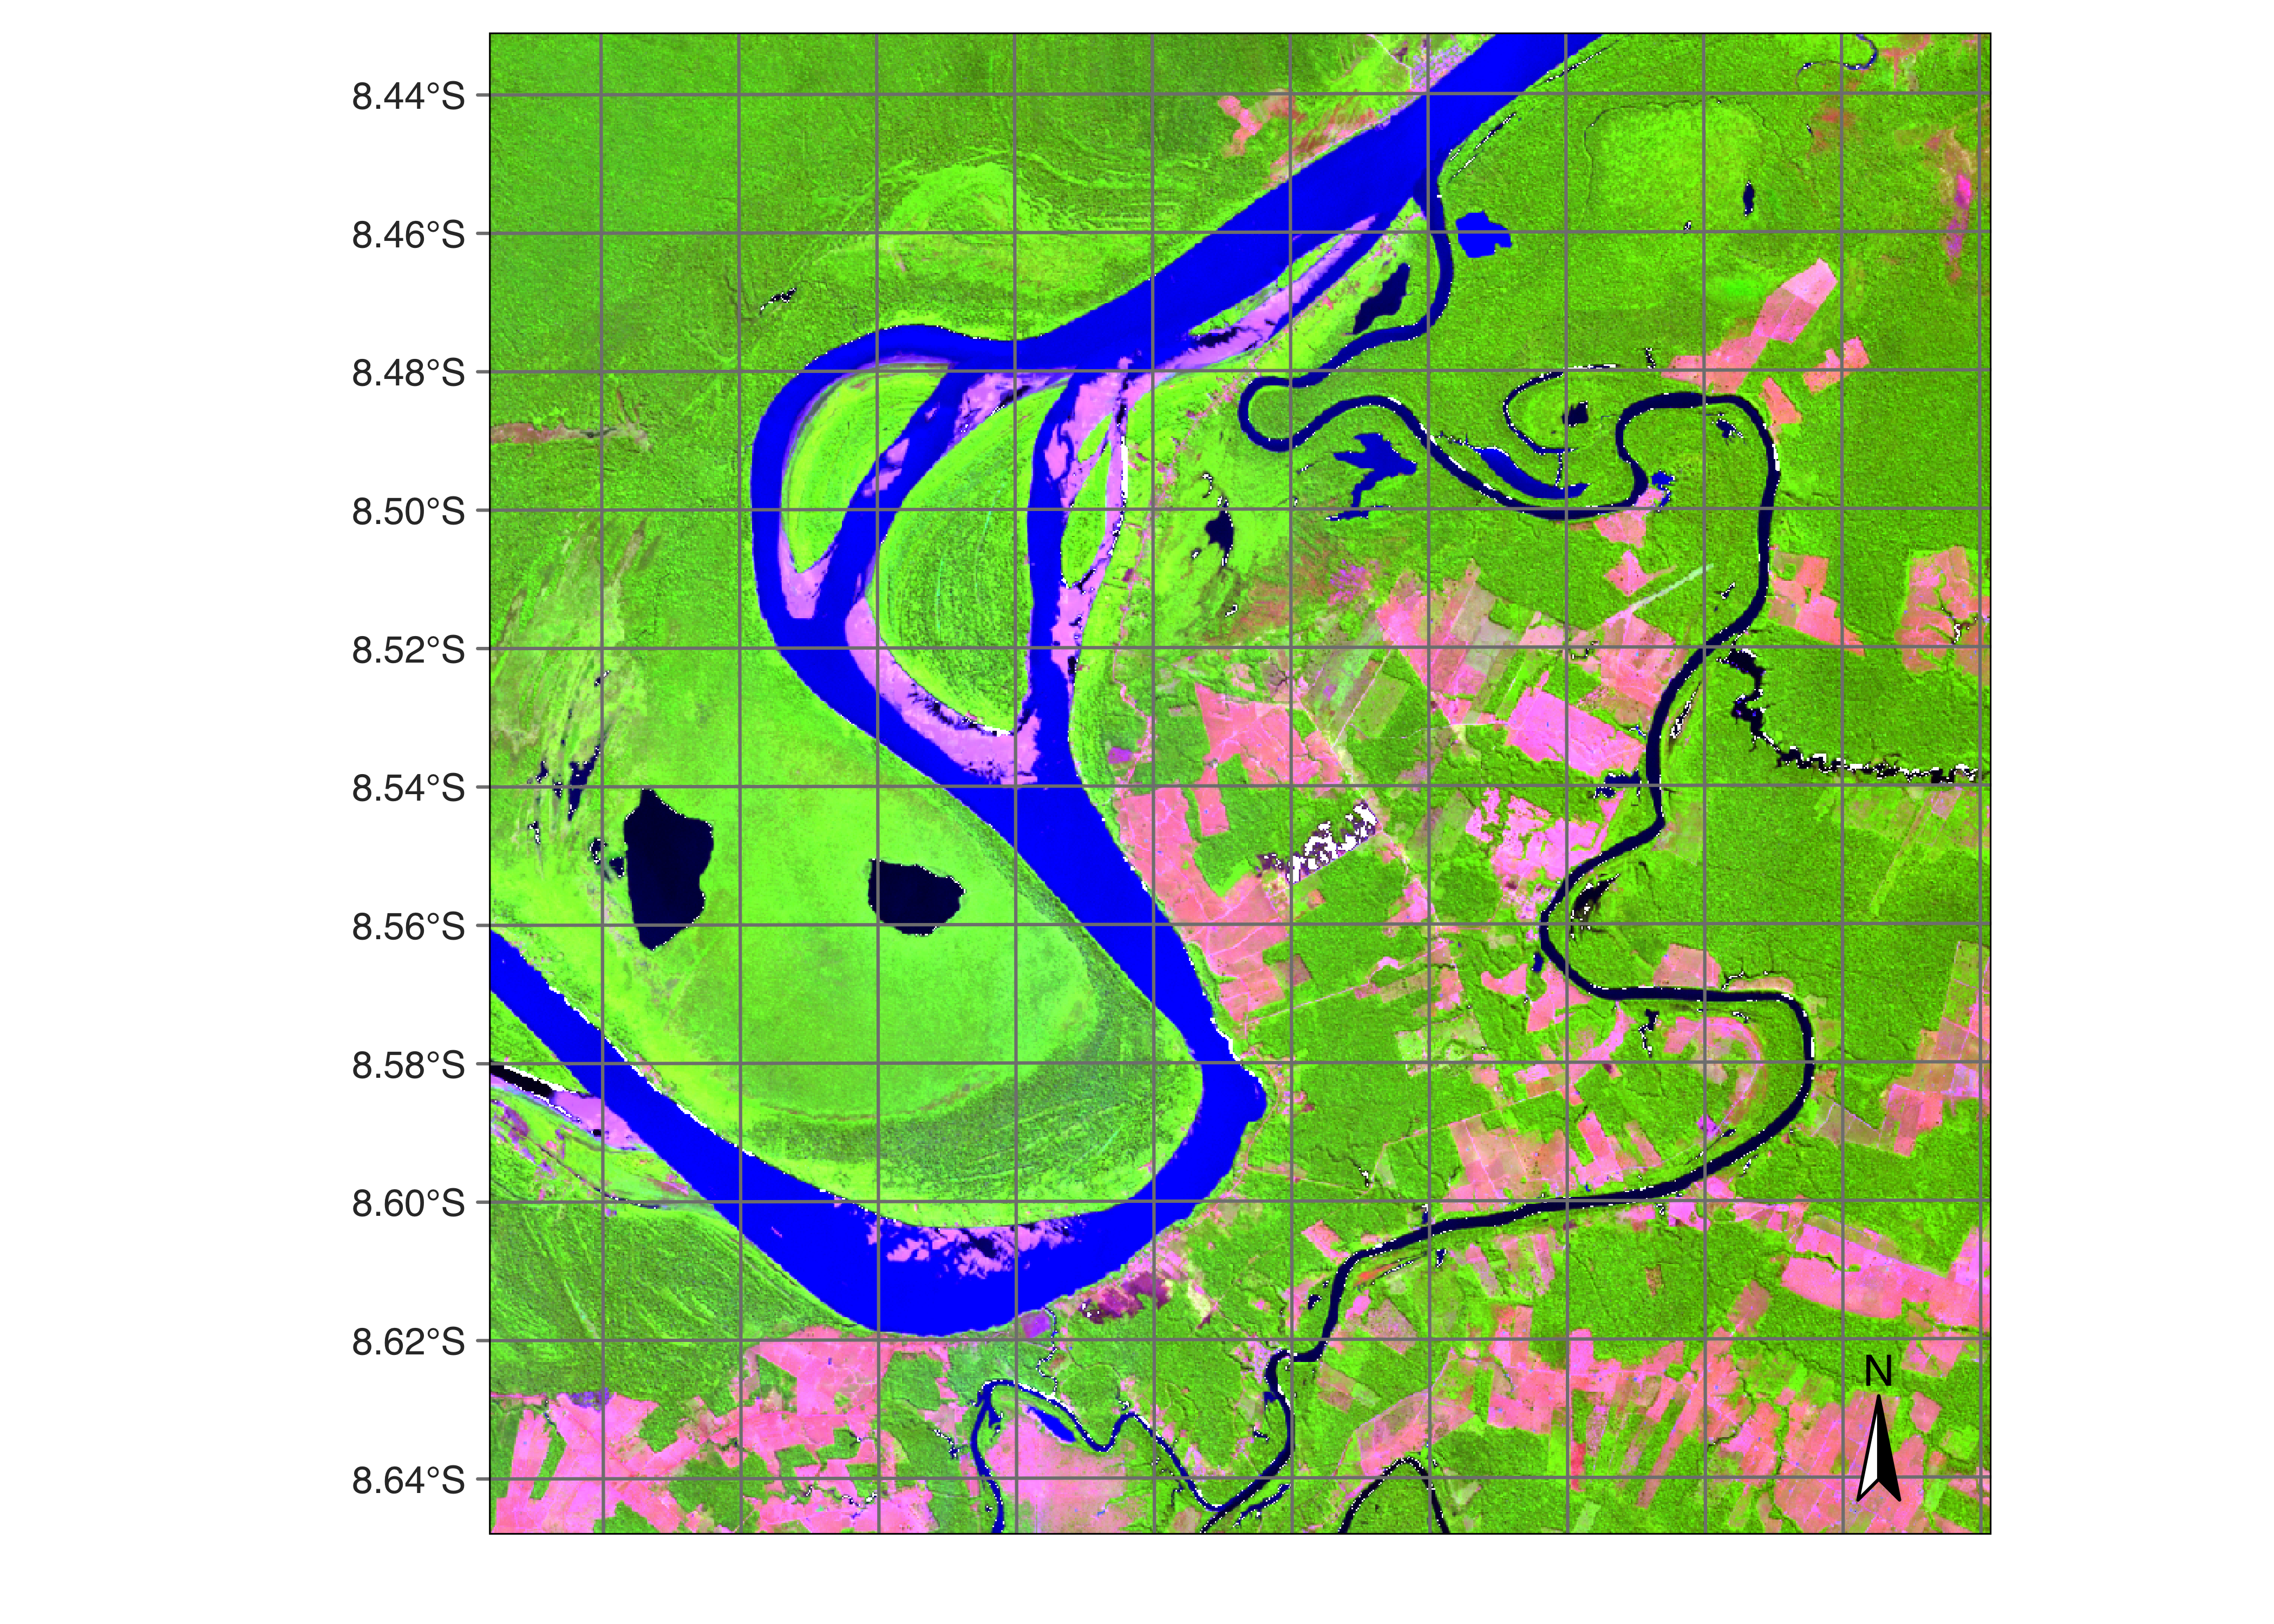 Final map of deforestation obtained by random forest model(Source: Authors).